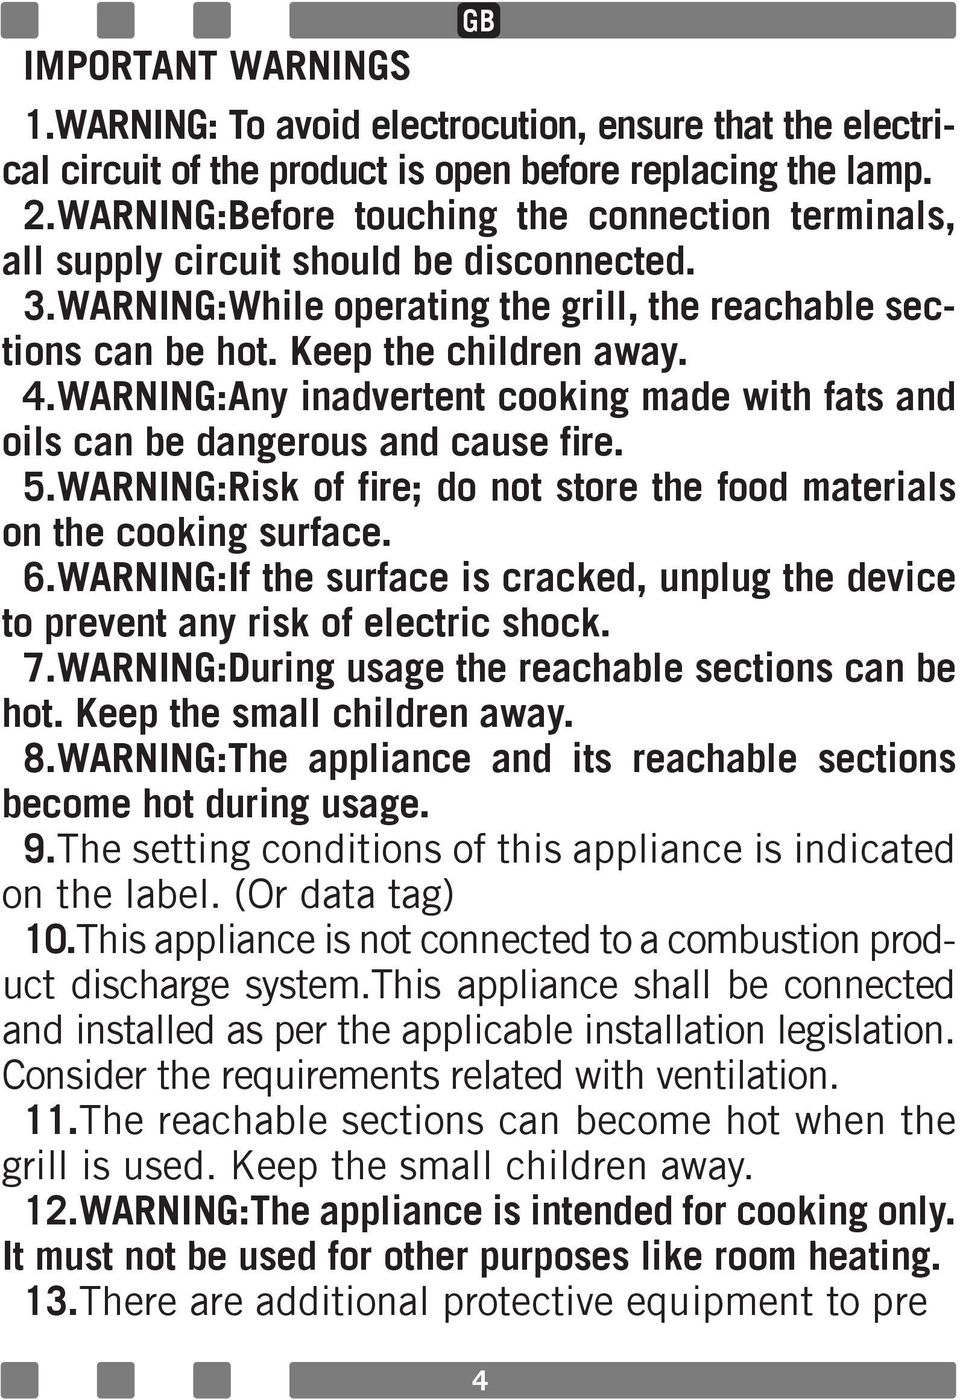 ARNING:Any inadvertent cooking made with fats and oils can be dangerous and cause fire. 5.ARNING:Risk of fire; do not store the food materials on the cooking surface. 6.